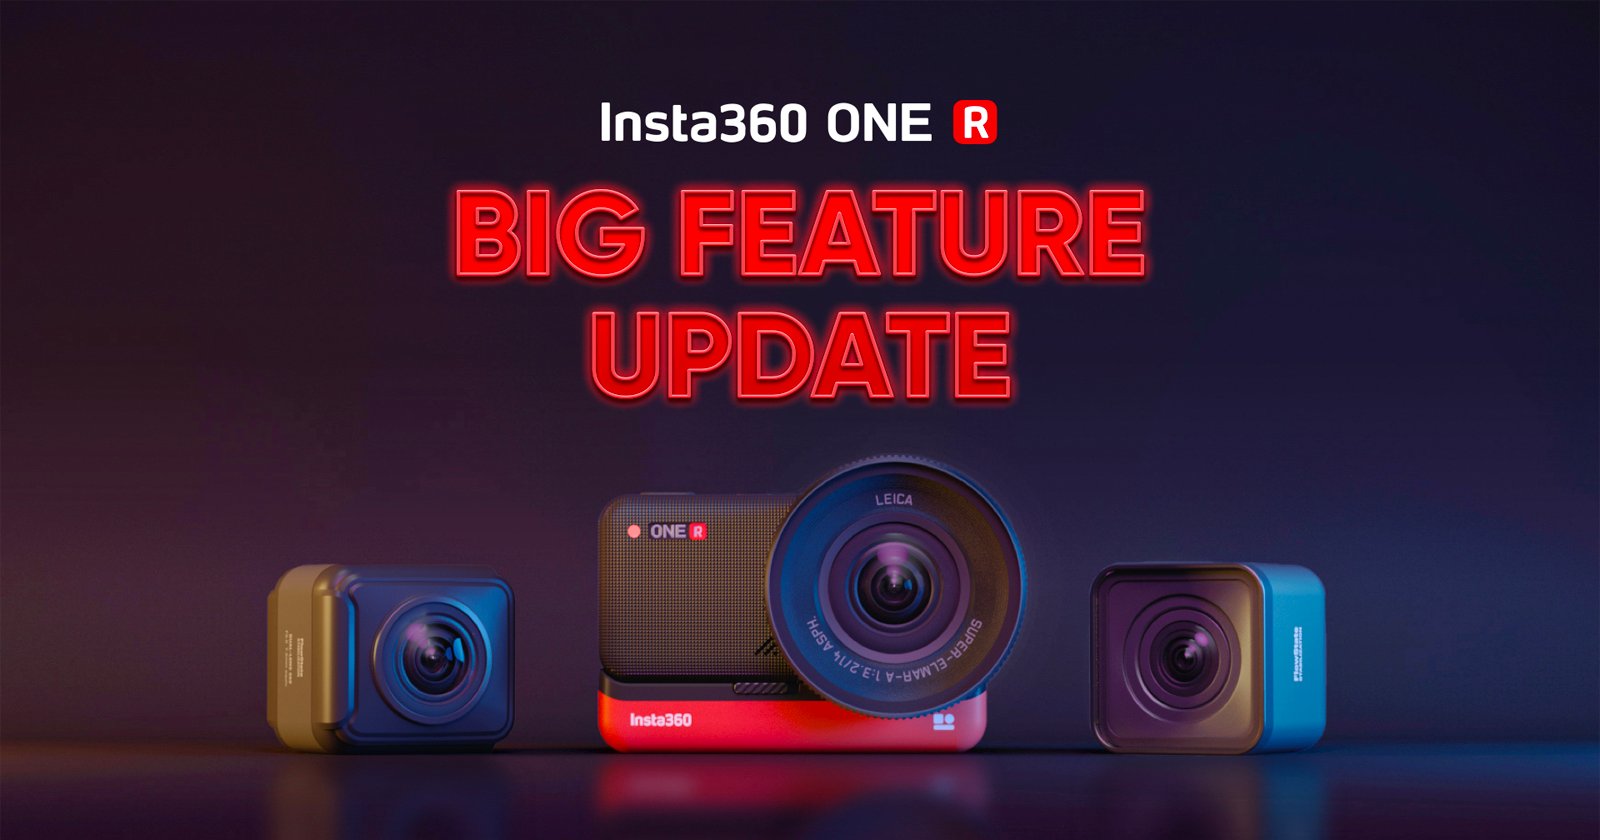 Insta360 X3 360-degree action camera introduces a larger